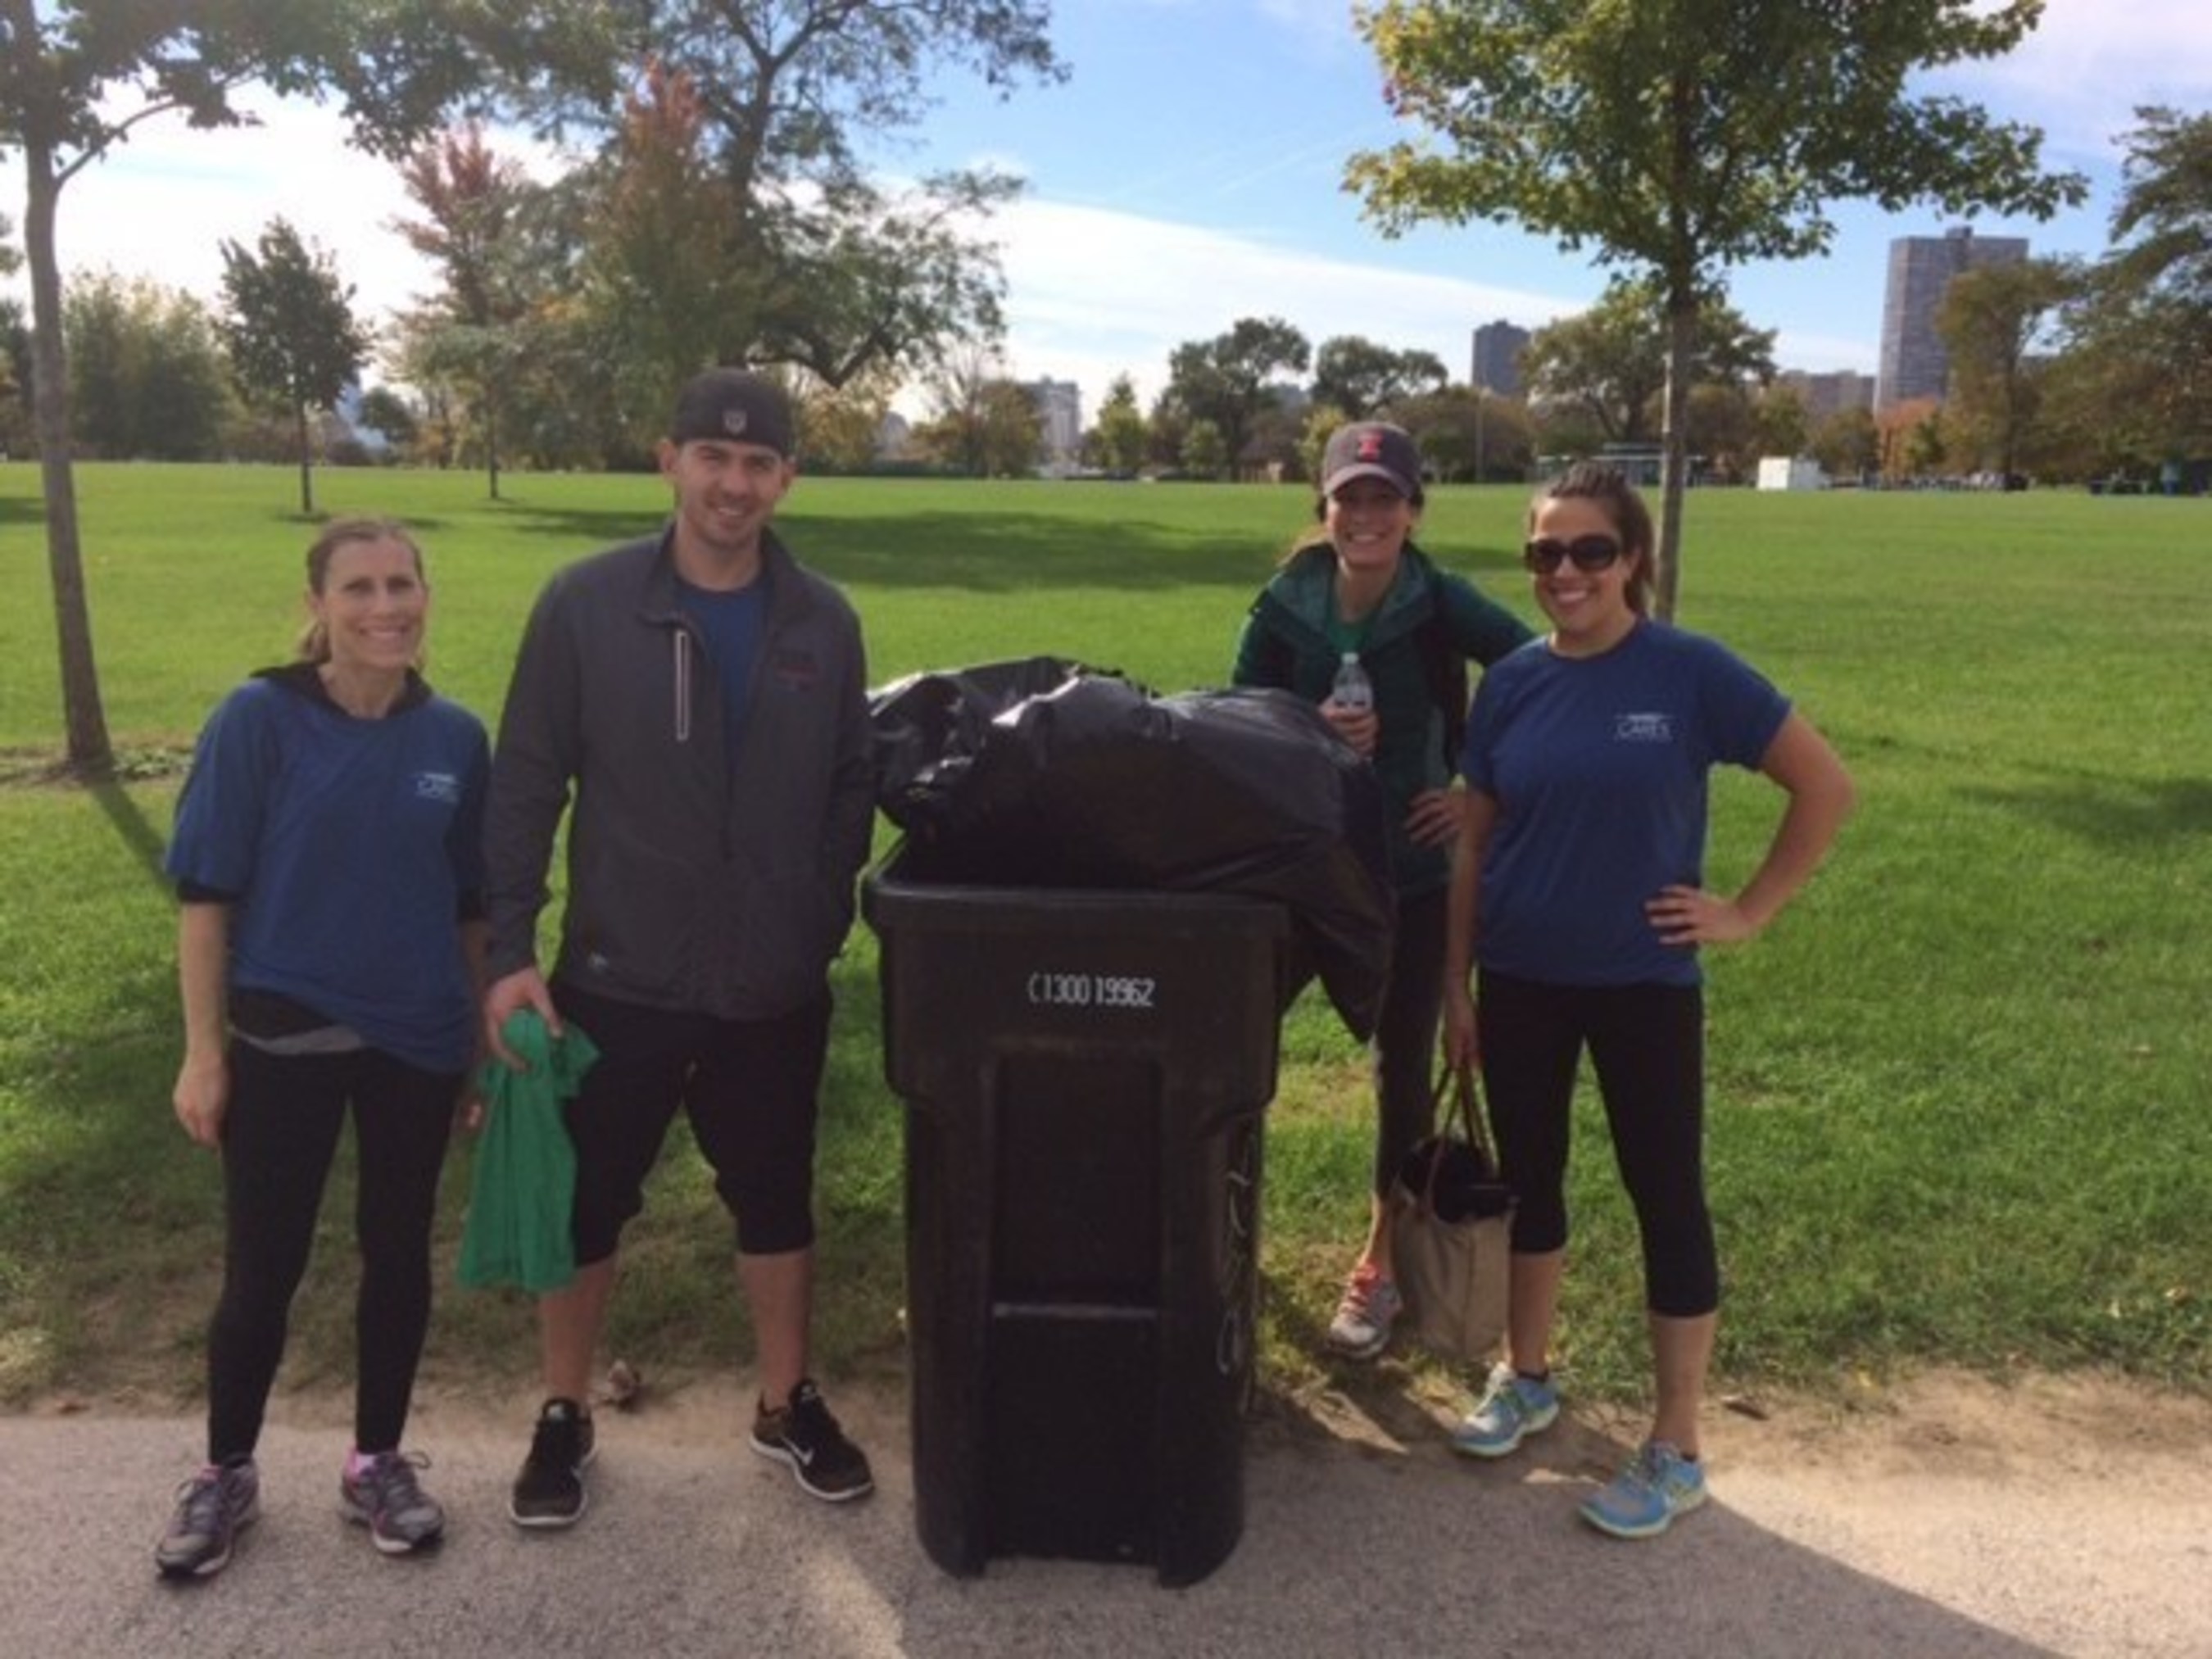 WebMD Cares Impact Day 2016 - The Chicago Team worked with the Chicago Parks Foundation to help clean up Montrose Beach.